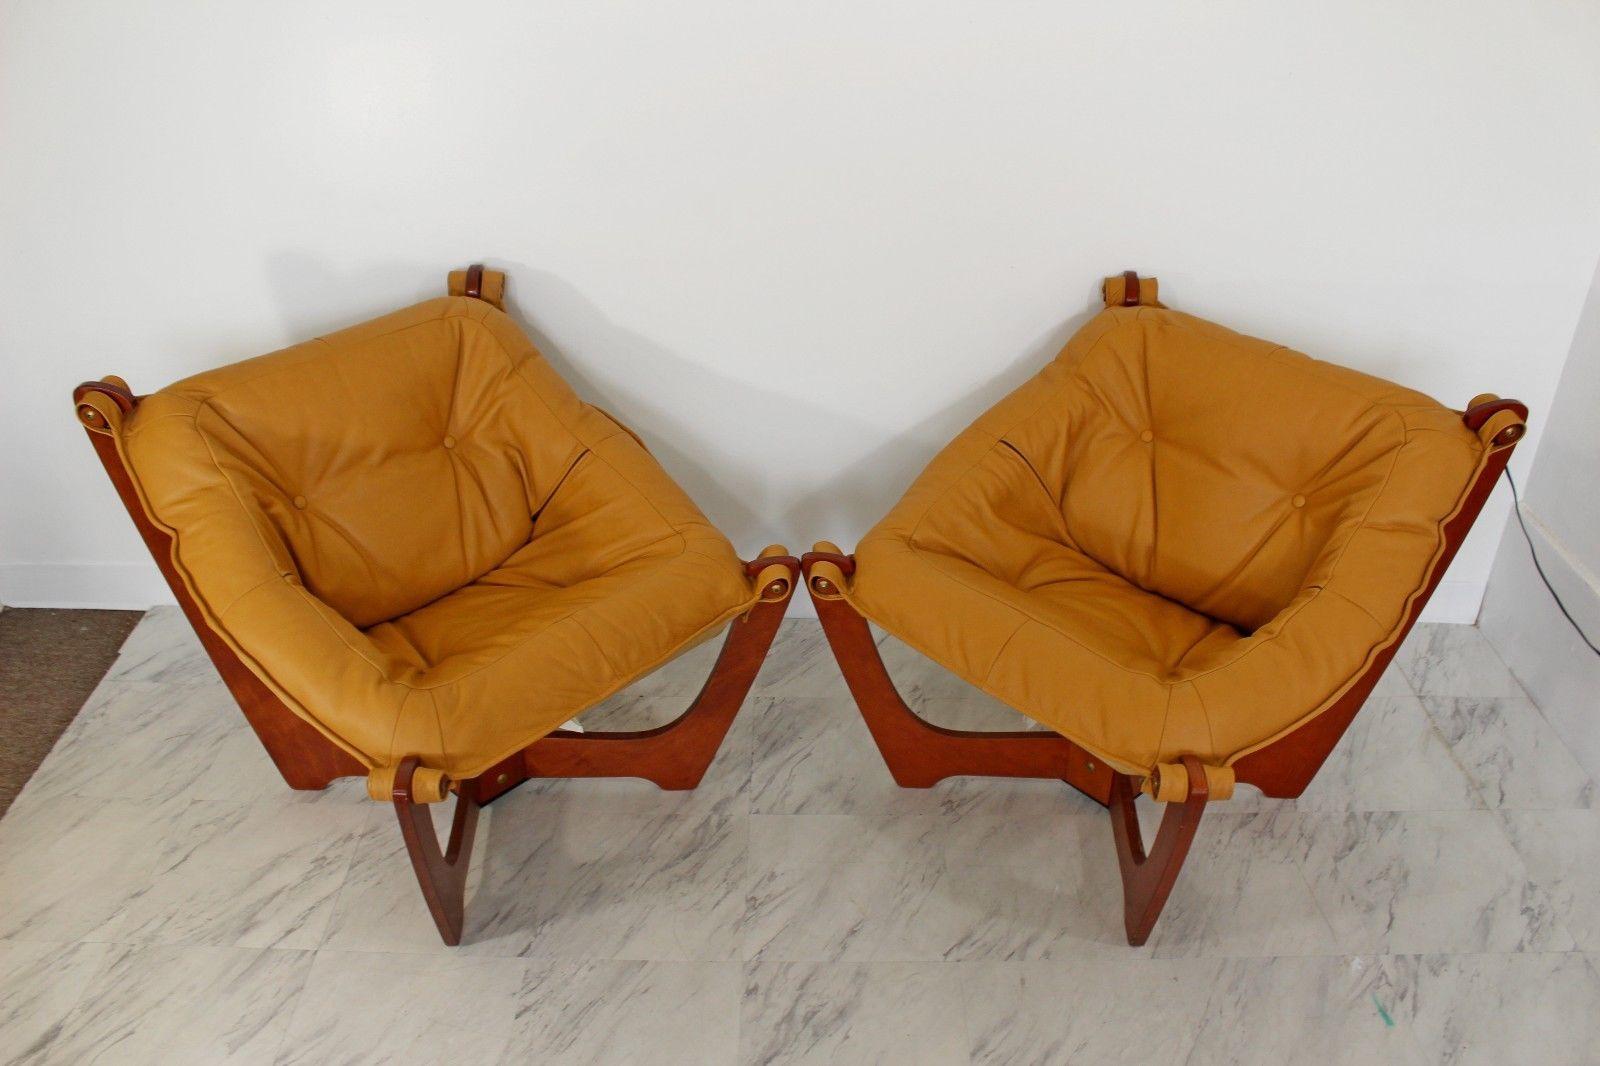 For your consideration is a pair of Luna Sling chairs are made of birch plywood with a warm natural tone. The four legs come out of a square base on an angle with soft curves leading upward. The seating is covered in tan leather and attaches to the